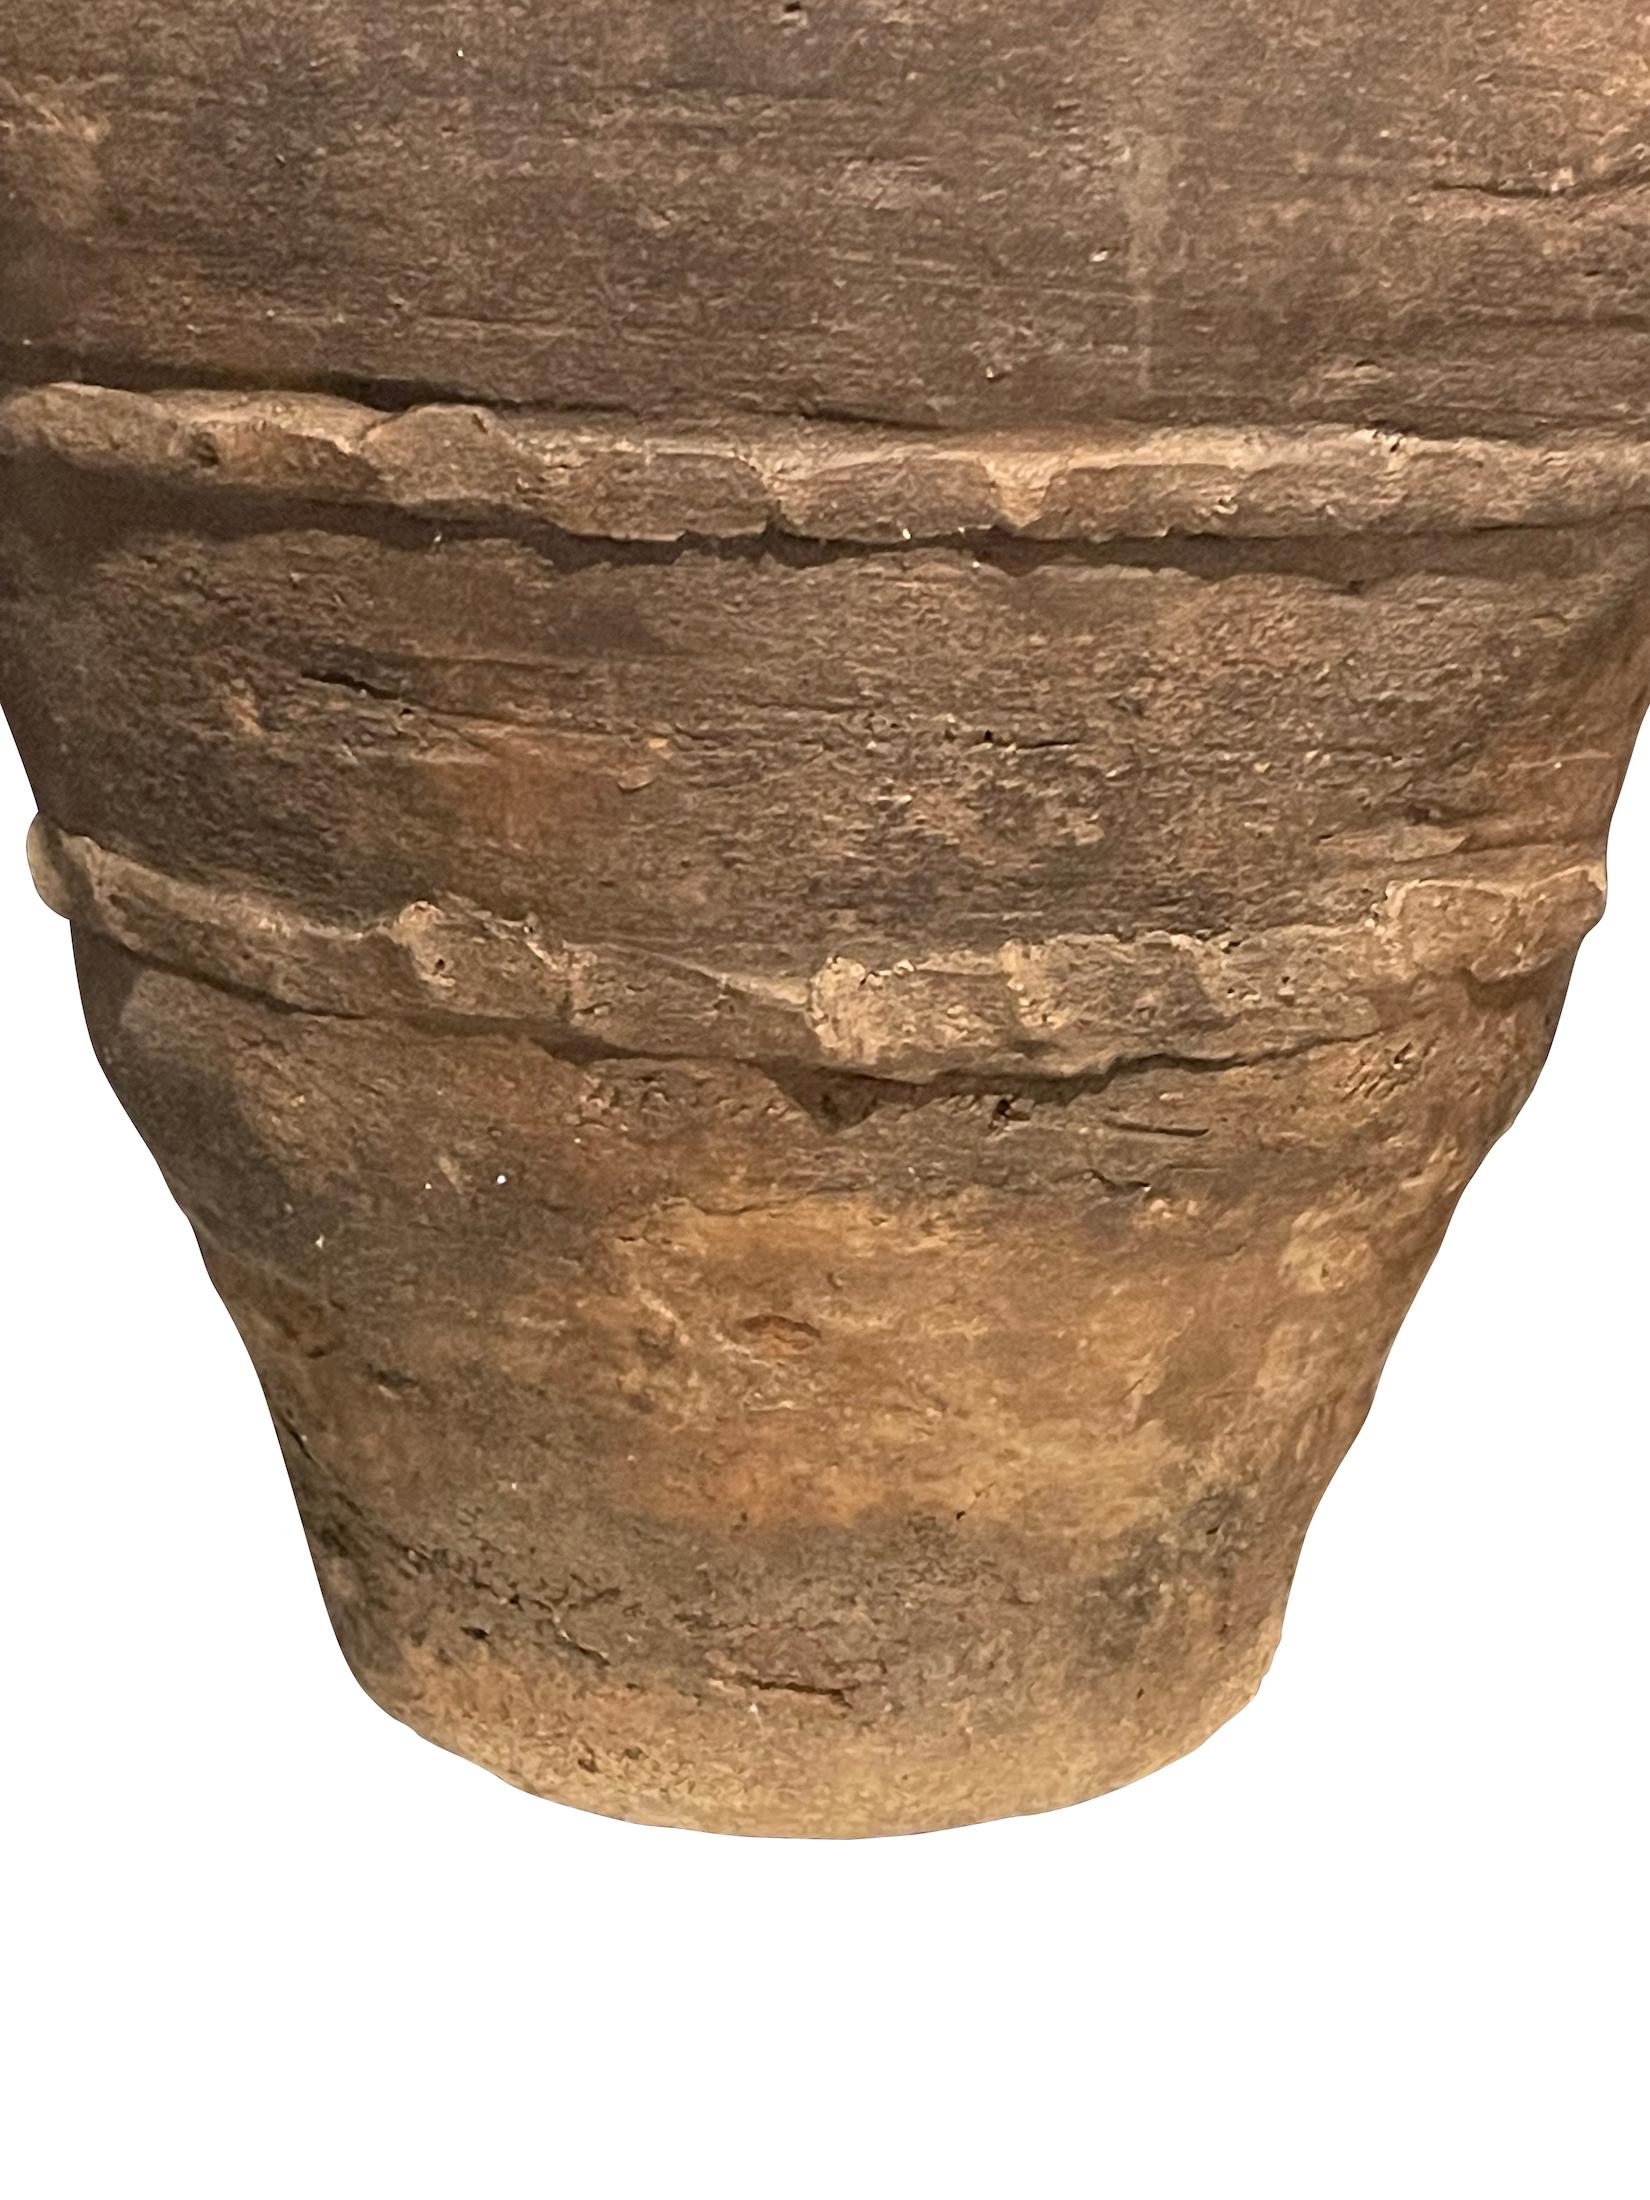 19th Century Spanish terracotta olive pot.
Unearthed from a very large family run olive oil producing business in southern Spain.
Brown in color with raised horizontal decorative details.
Beautiful and natural aged patina.
One of many pieces